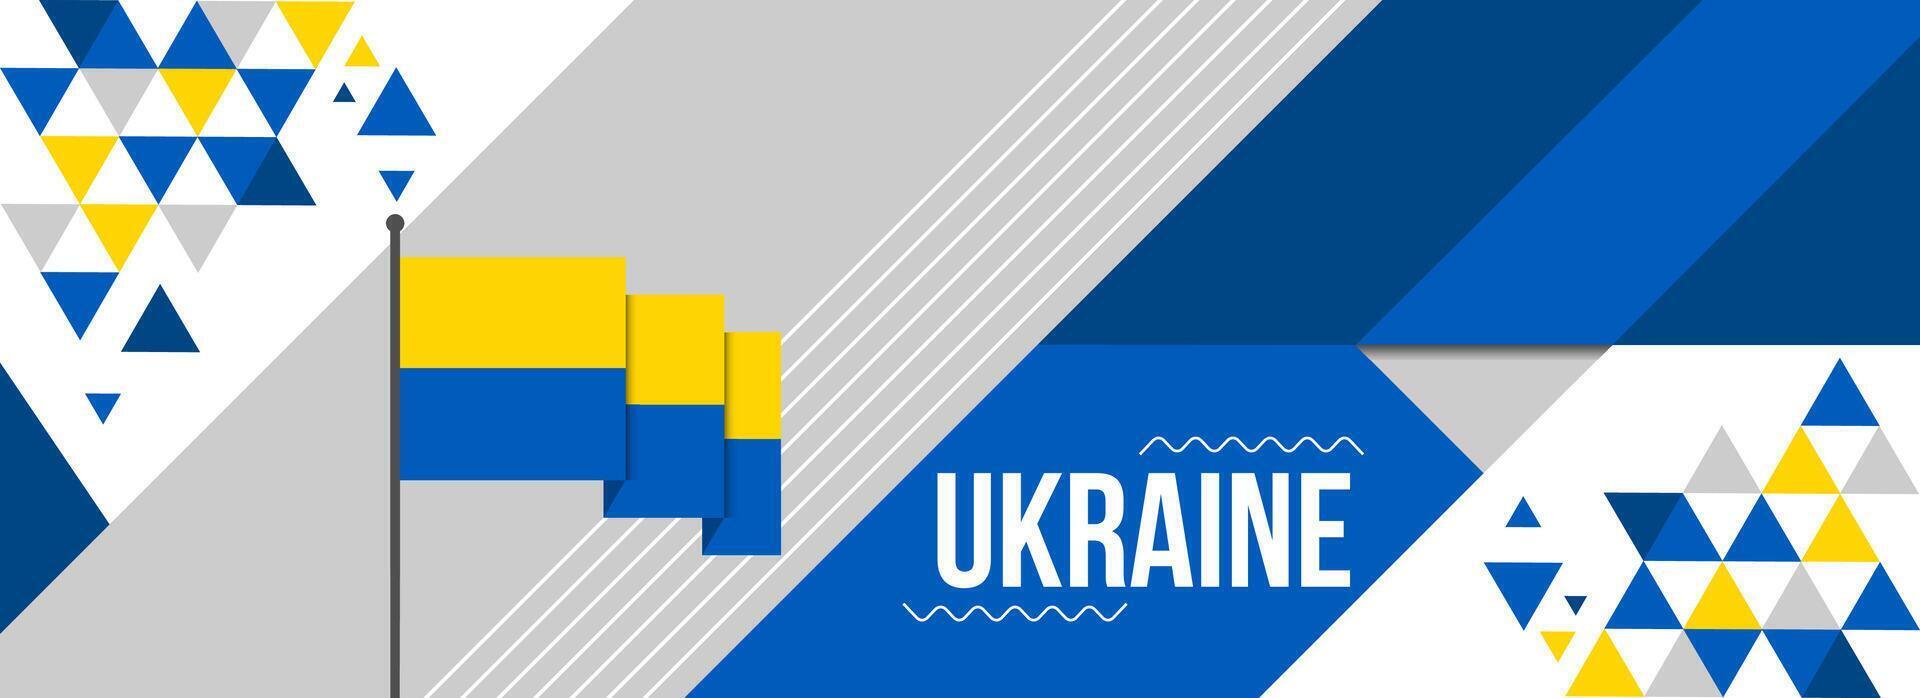 Ukraine national or independence day banner design for country celebration. Flag of Ukraine modern retro design abstract geometric icons. Vector illustration